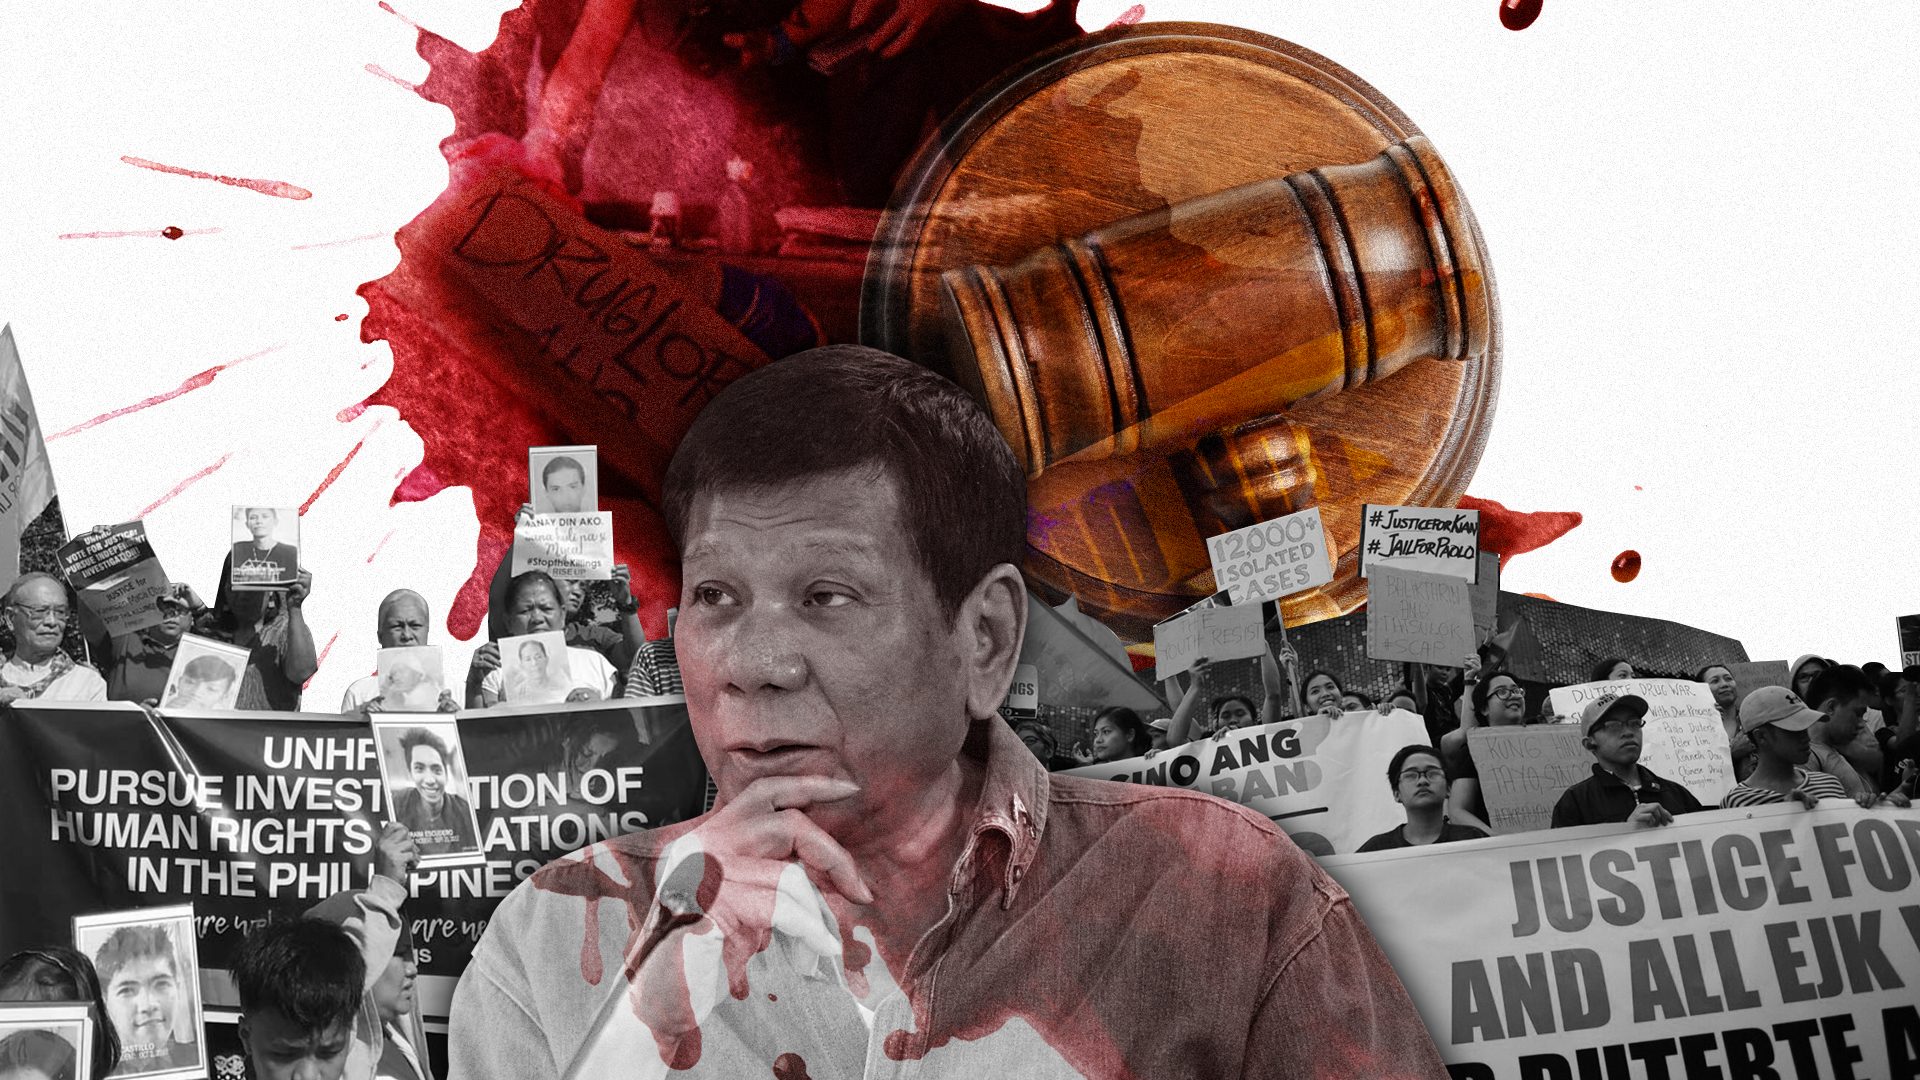 Election of Duterte’s successor brings hope, fear to families of drug war victims